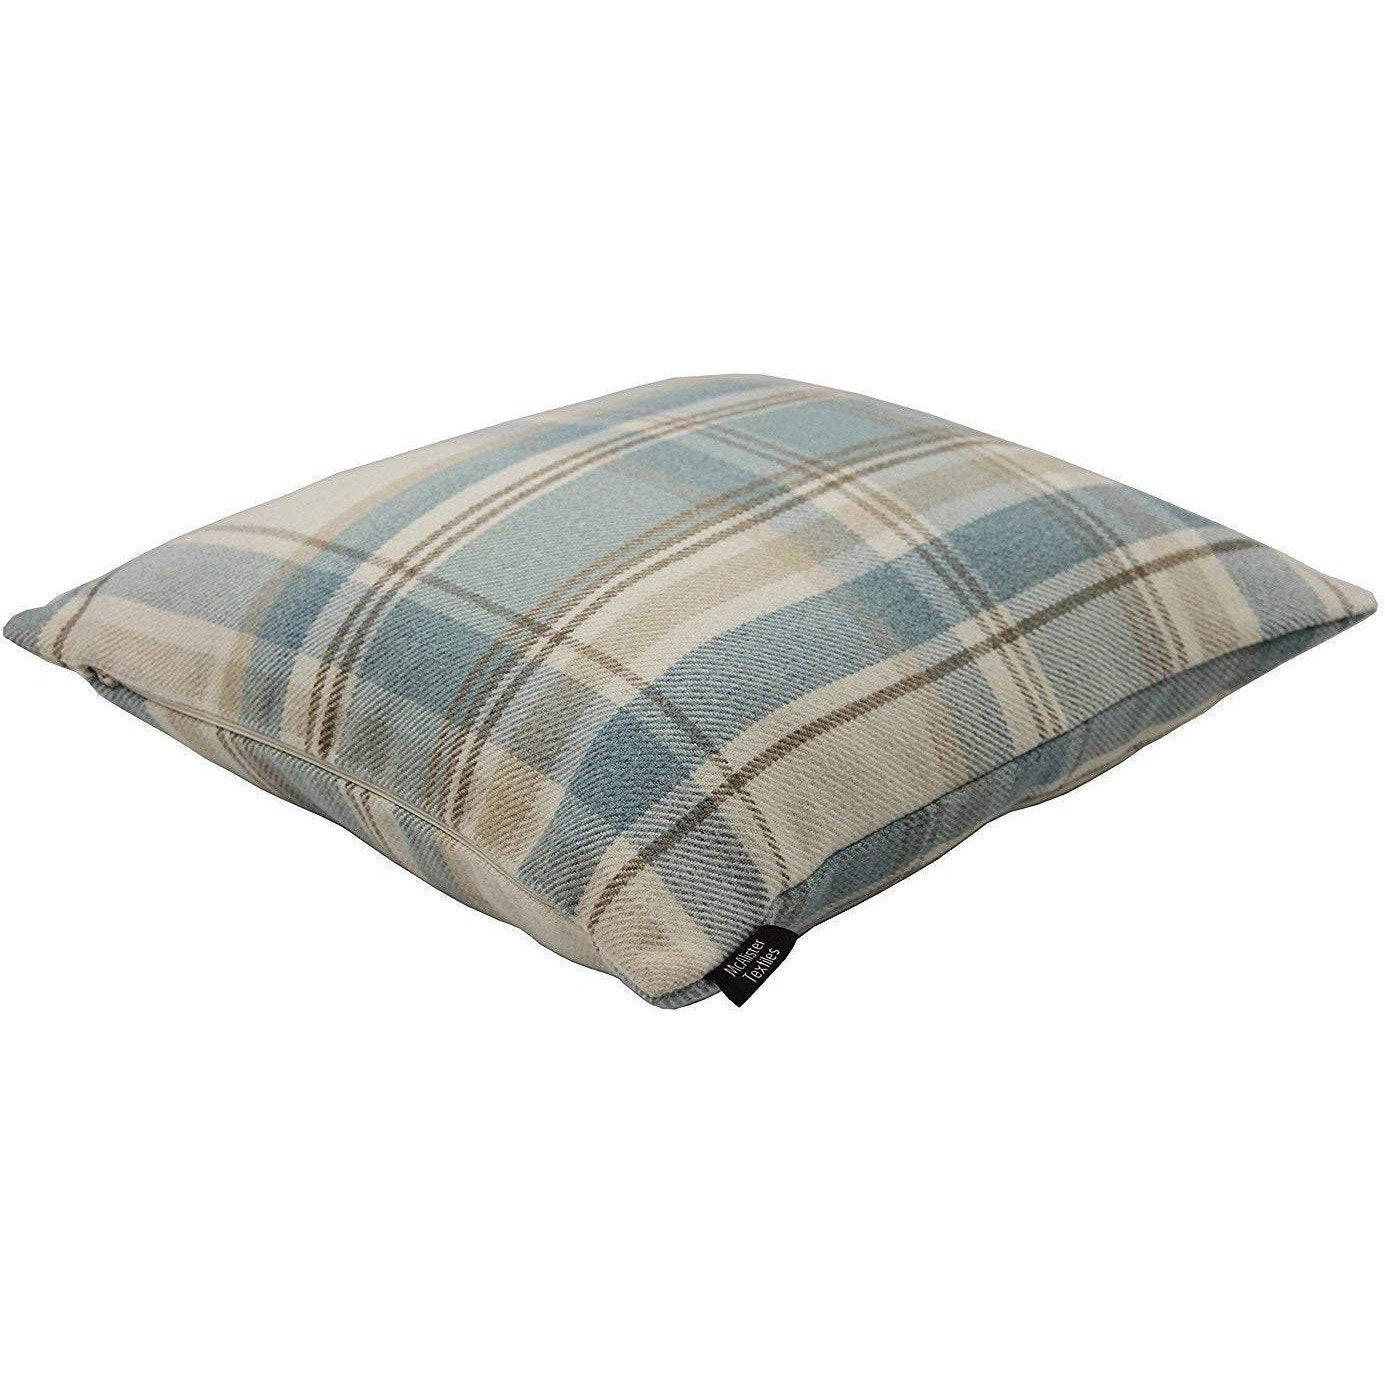 McAlister Textiles Heritage Duck Egg Blue Tartan 43cm x 43cm Cushion Sets Cushions and Covers 